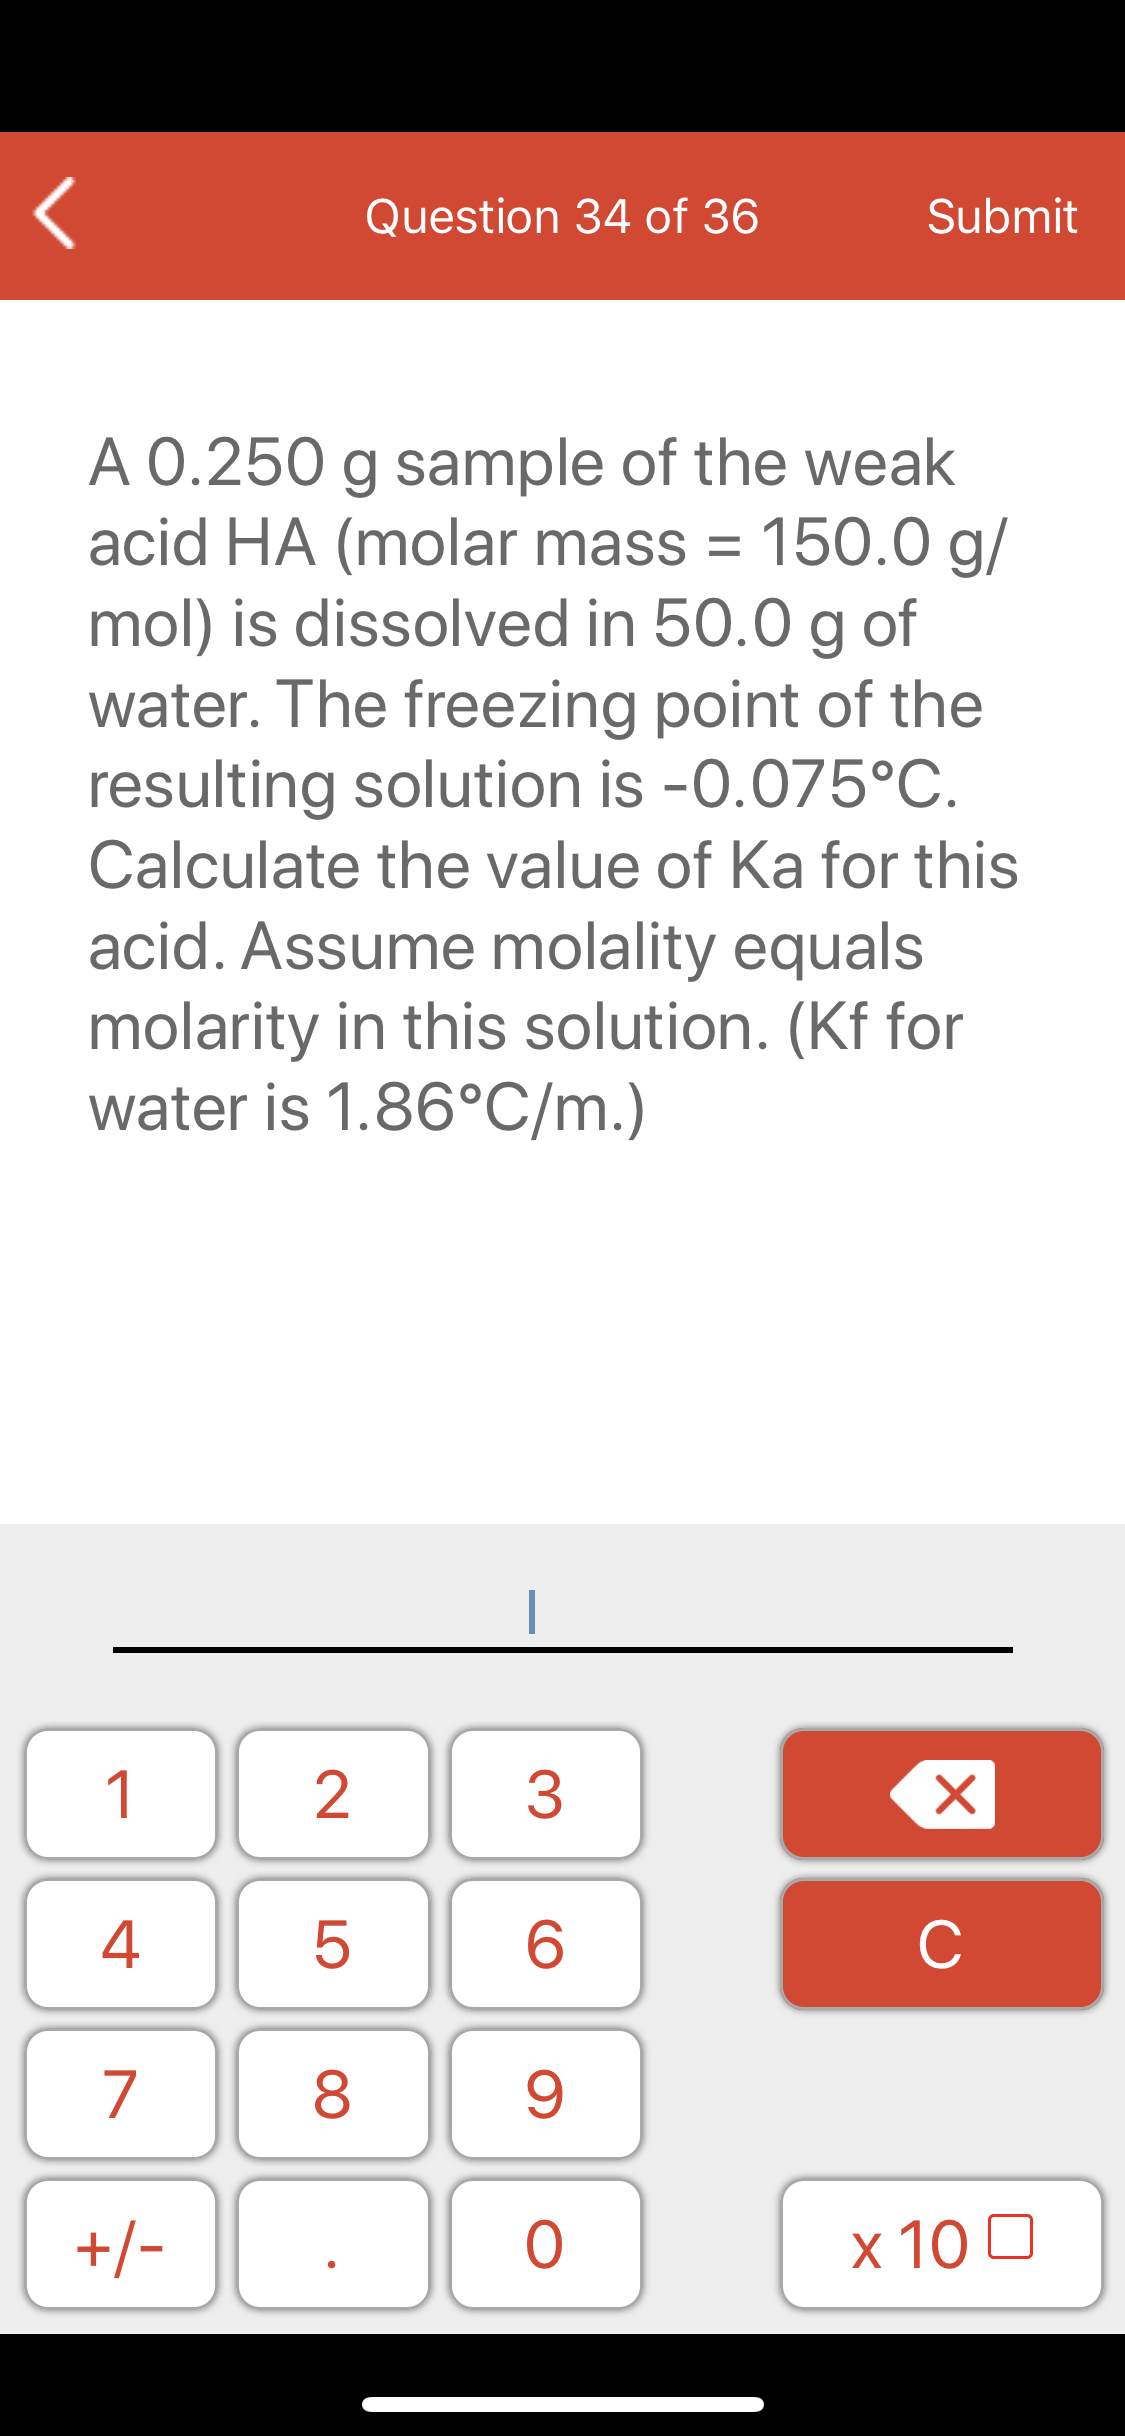 Question 34 of 36
Submit
A 0.250 g sample of the weak
acid HA (molar mass = 150.0 g/
mol) is dissolved in 50.0 g of
water. The freezing point of the
resulting solution is -0.075°C.
Calculate the value of Ka for this
acid. Assume molality equals
molarity in this solution. (Kf for
water is 1.86°C/m.)
1
3
4
C
7
+/-
x 10 0
LO
00
